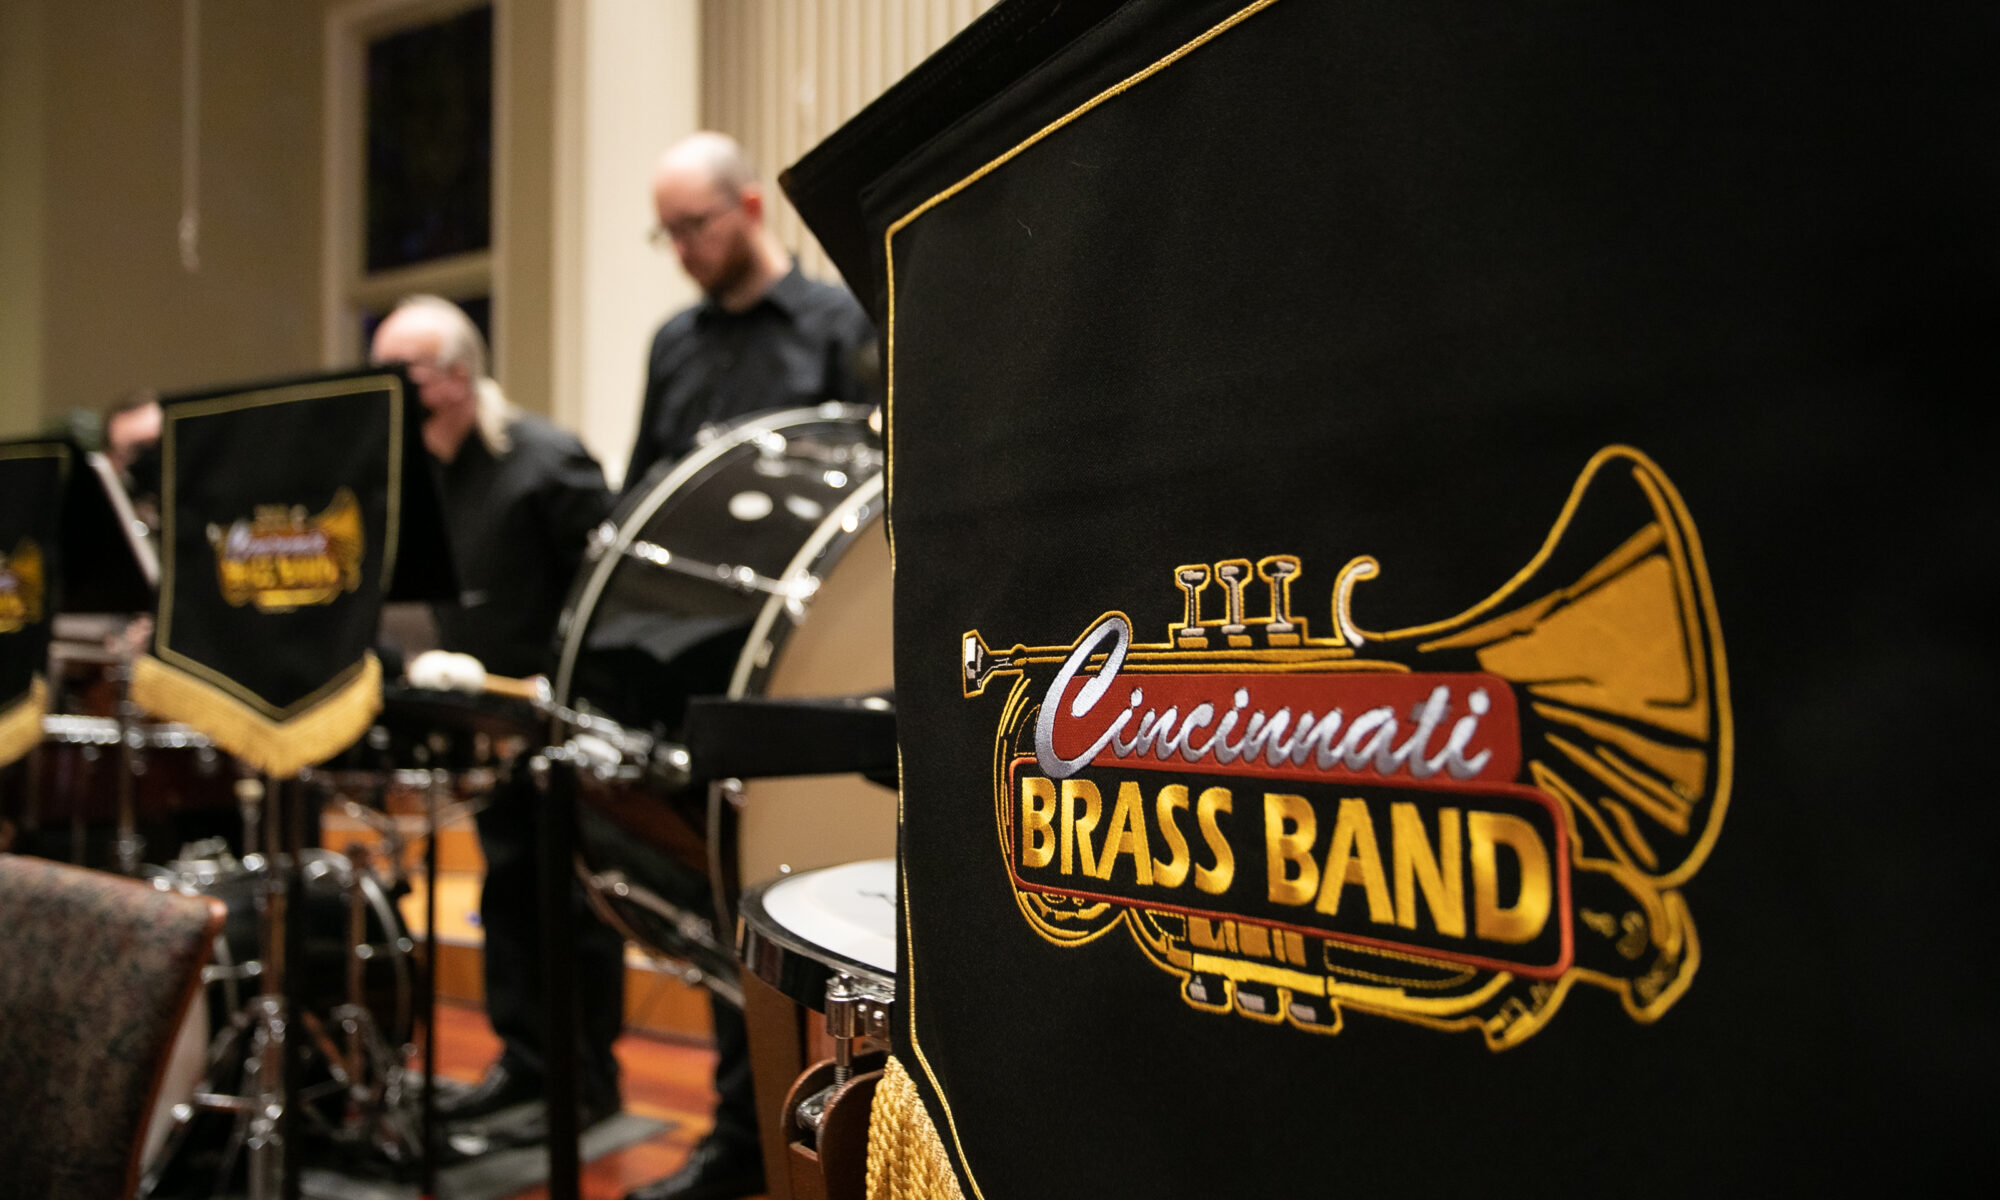 A music stand banner with the Cincinnati Brass band logo in the foreground and some of our percussion players in the background